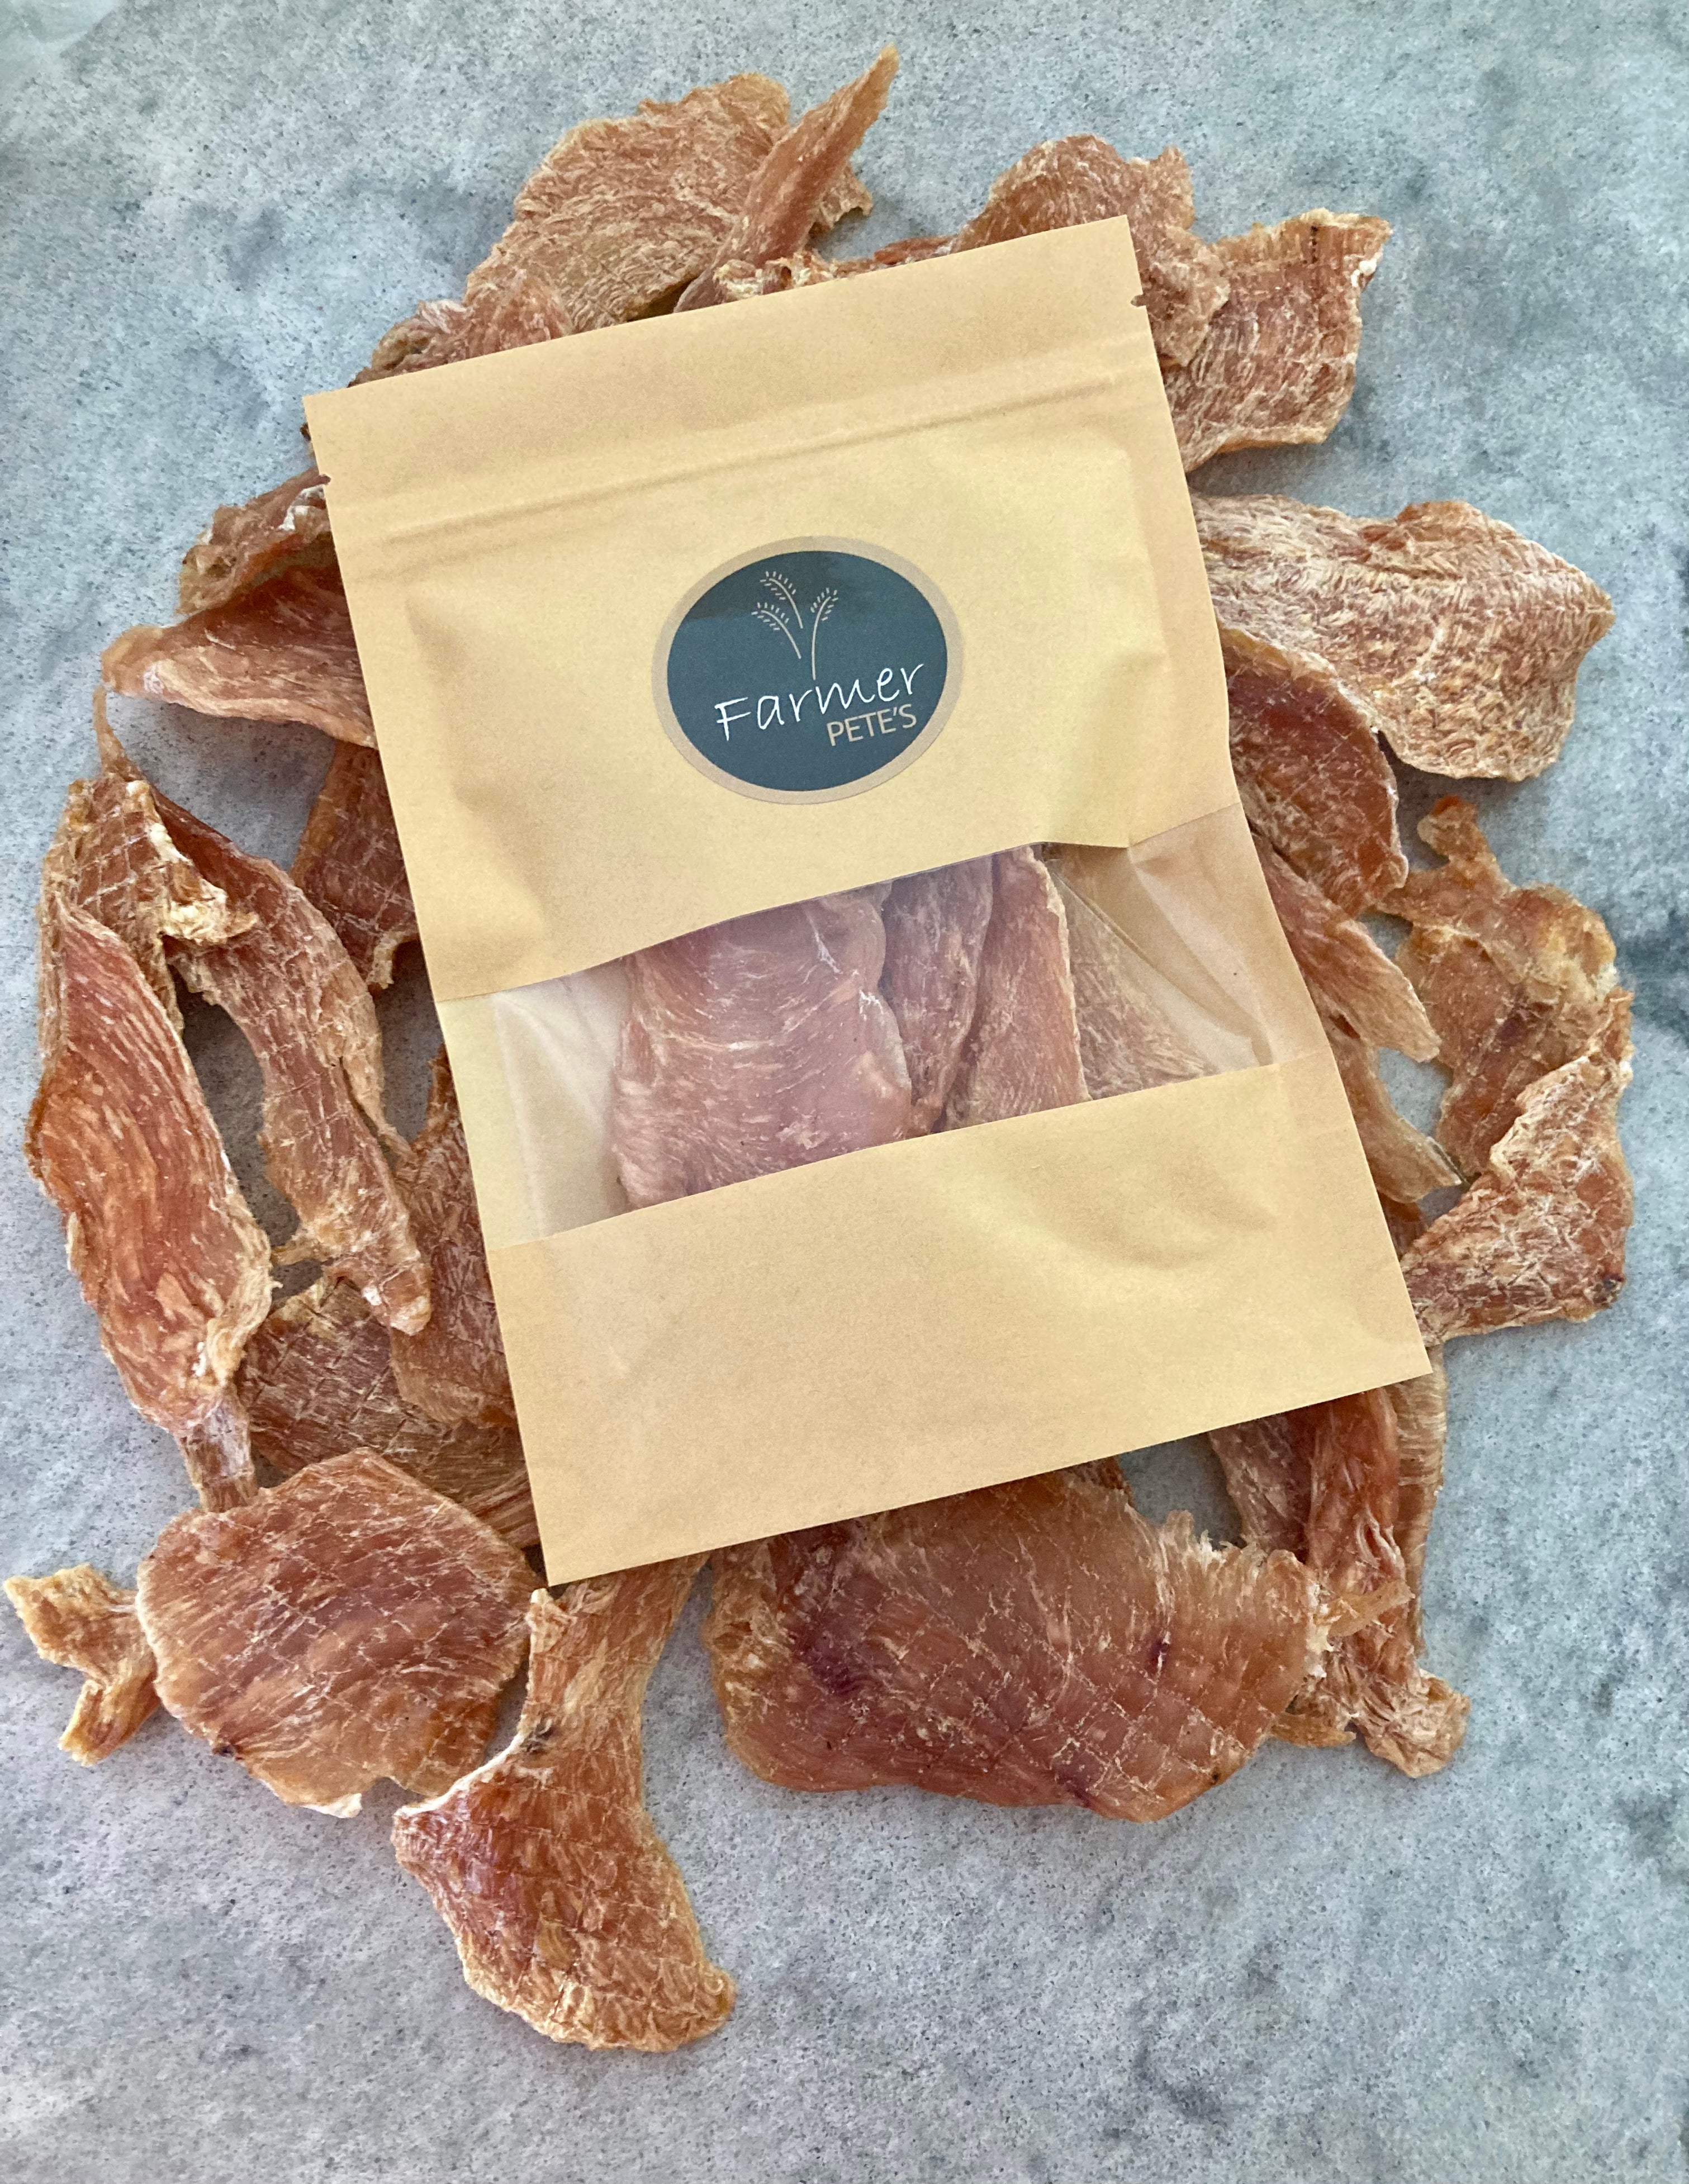 Homemade chicken jerky for pets by Farmer Pete's.